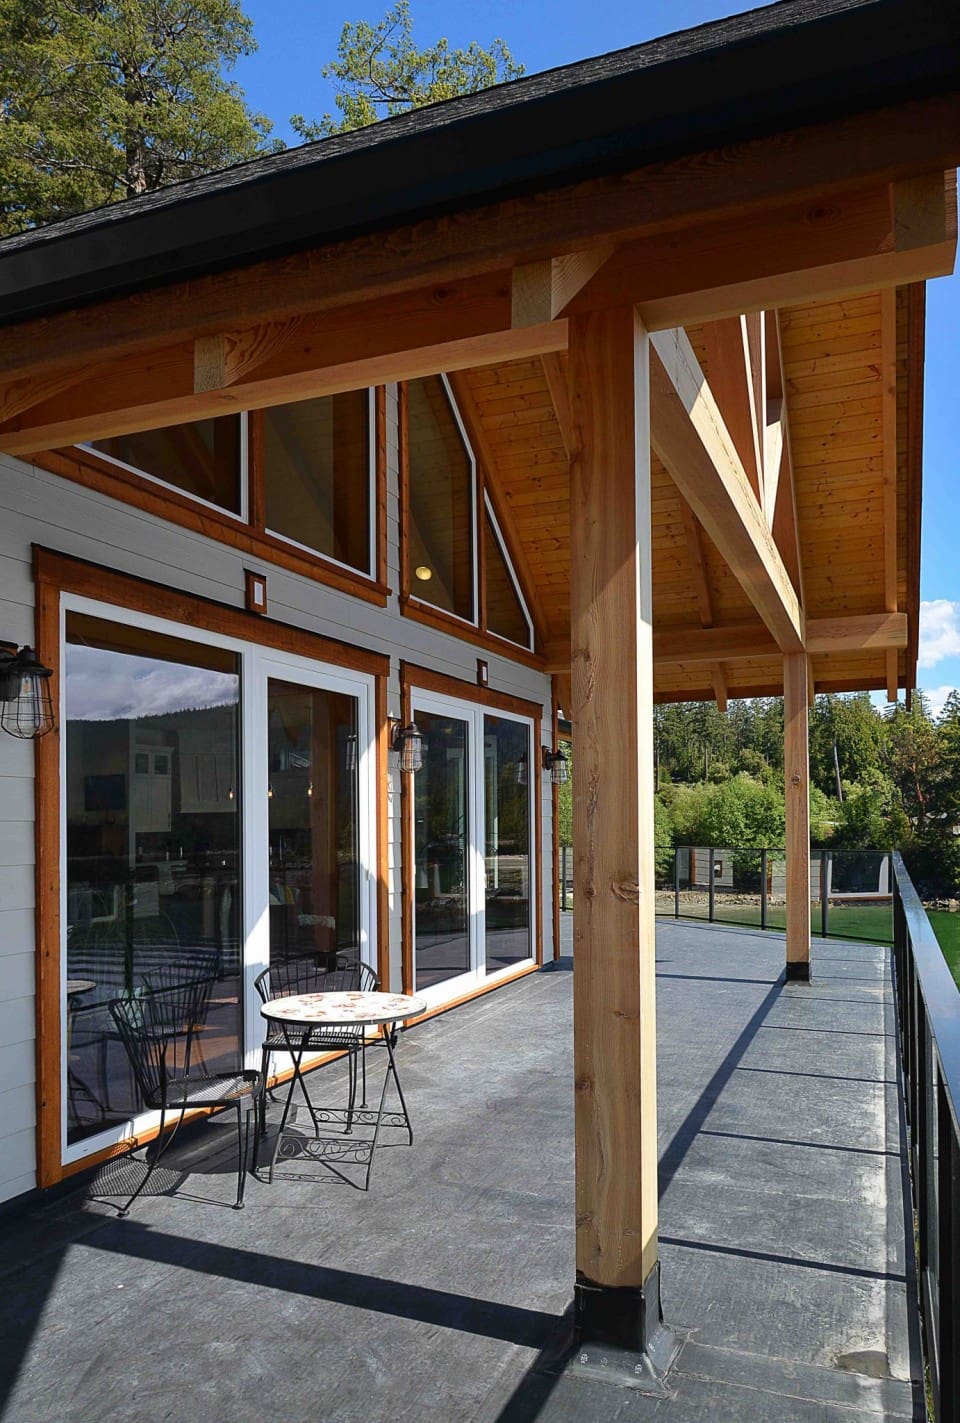 The deck and exposed beams outside a timber frame home